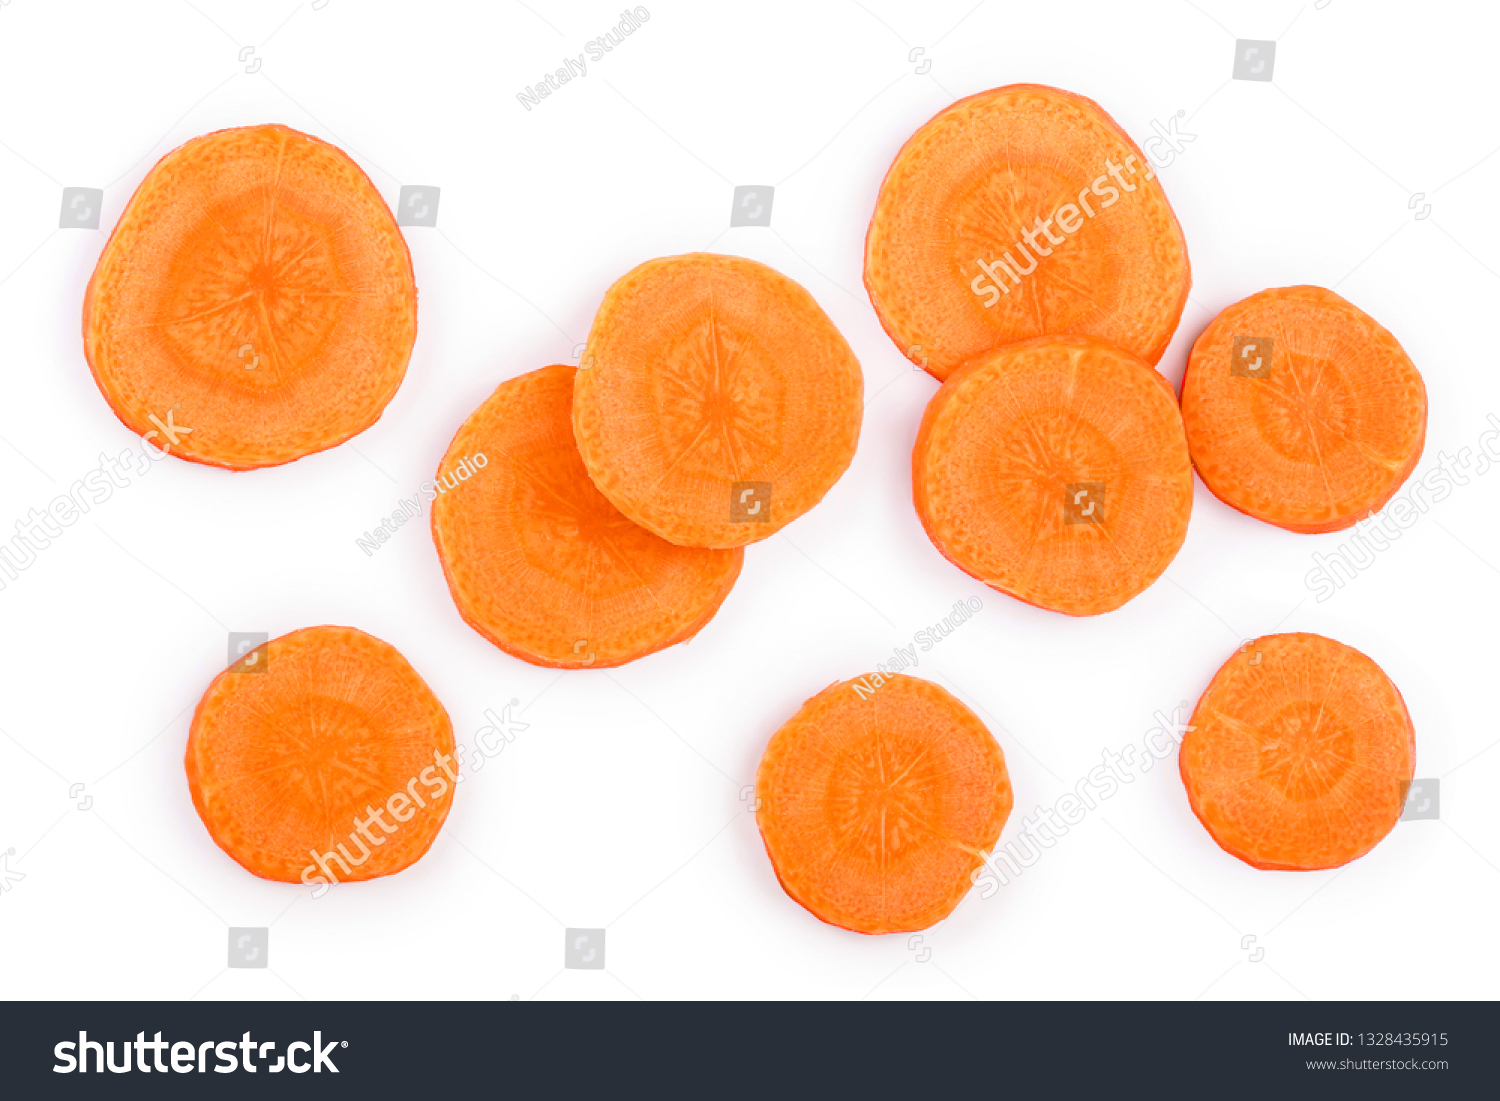 Carrot slice isolated on white background. Top view. Flat lay #1328435915